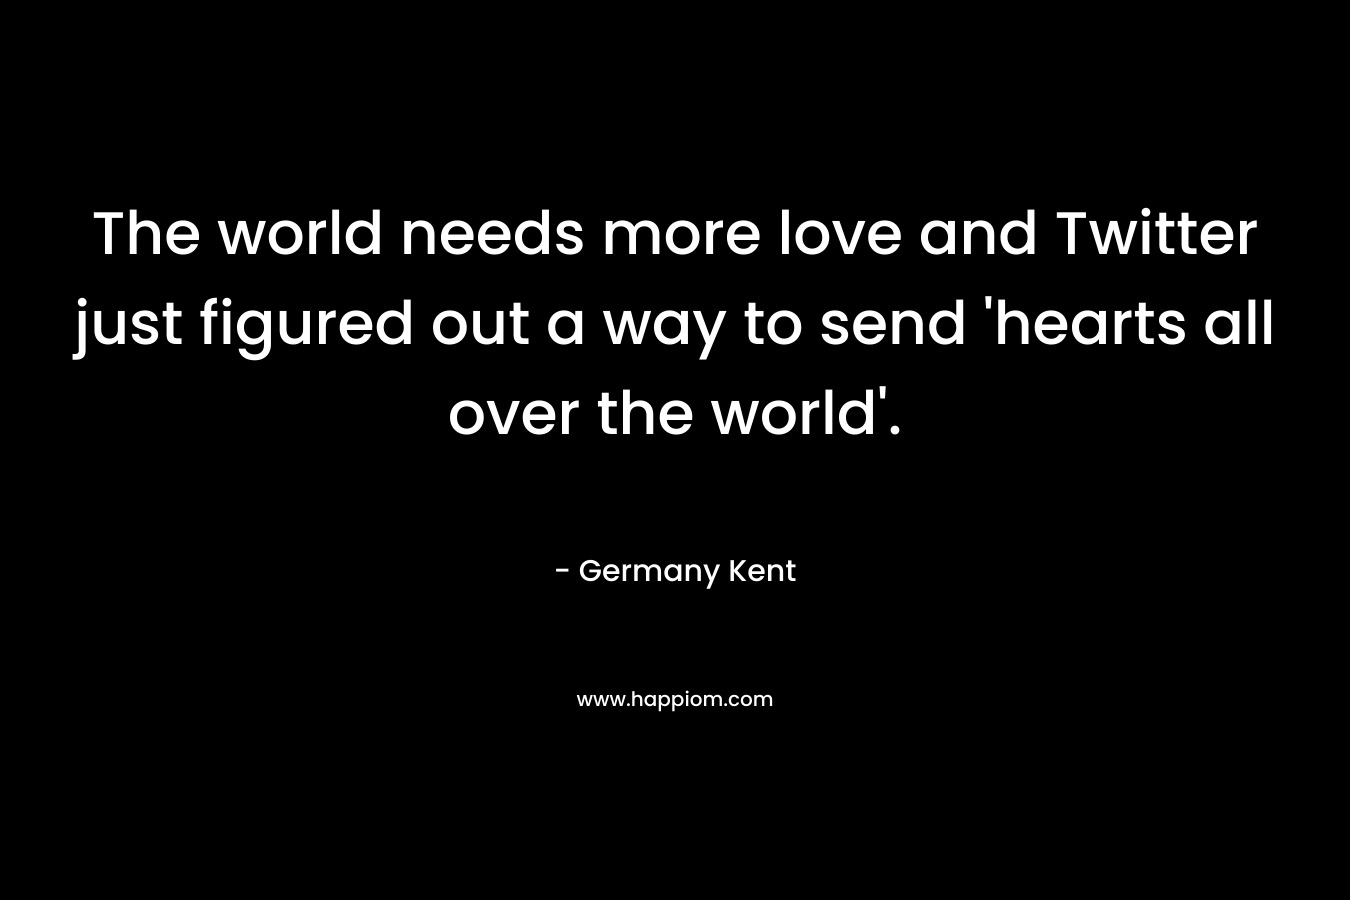 The world needs more love and Twitter just figured out a way to send ‘hearts all over the world’. – Germany Kent